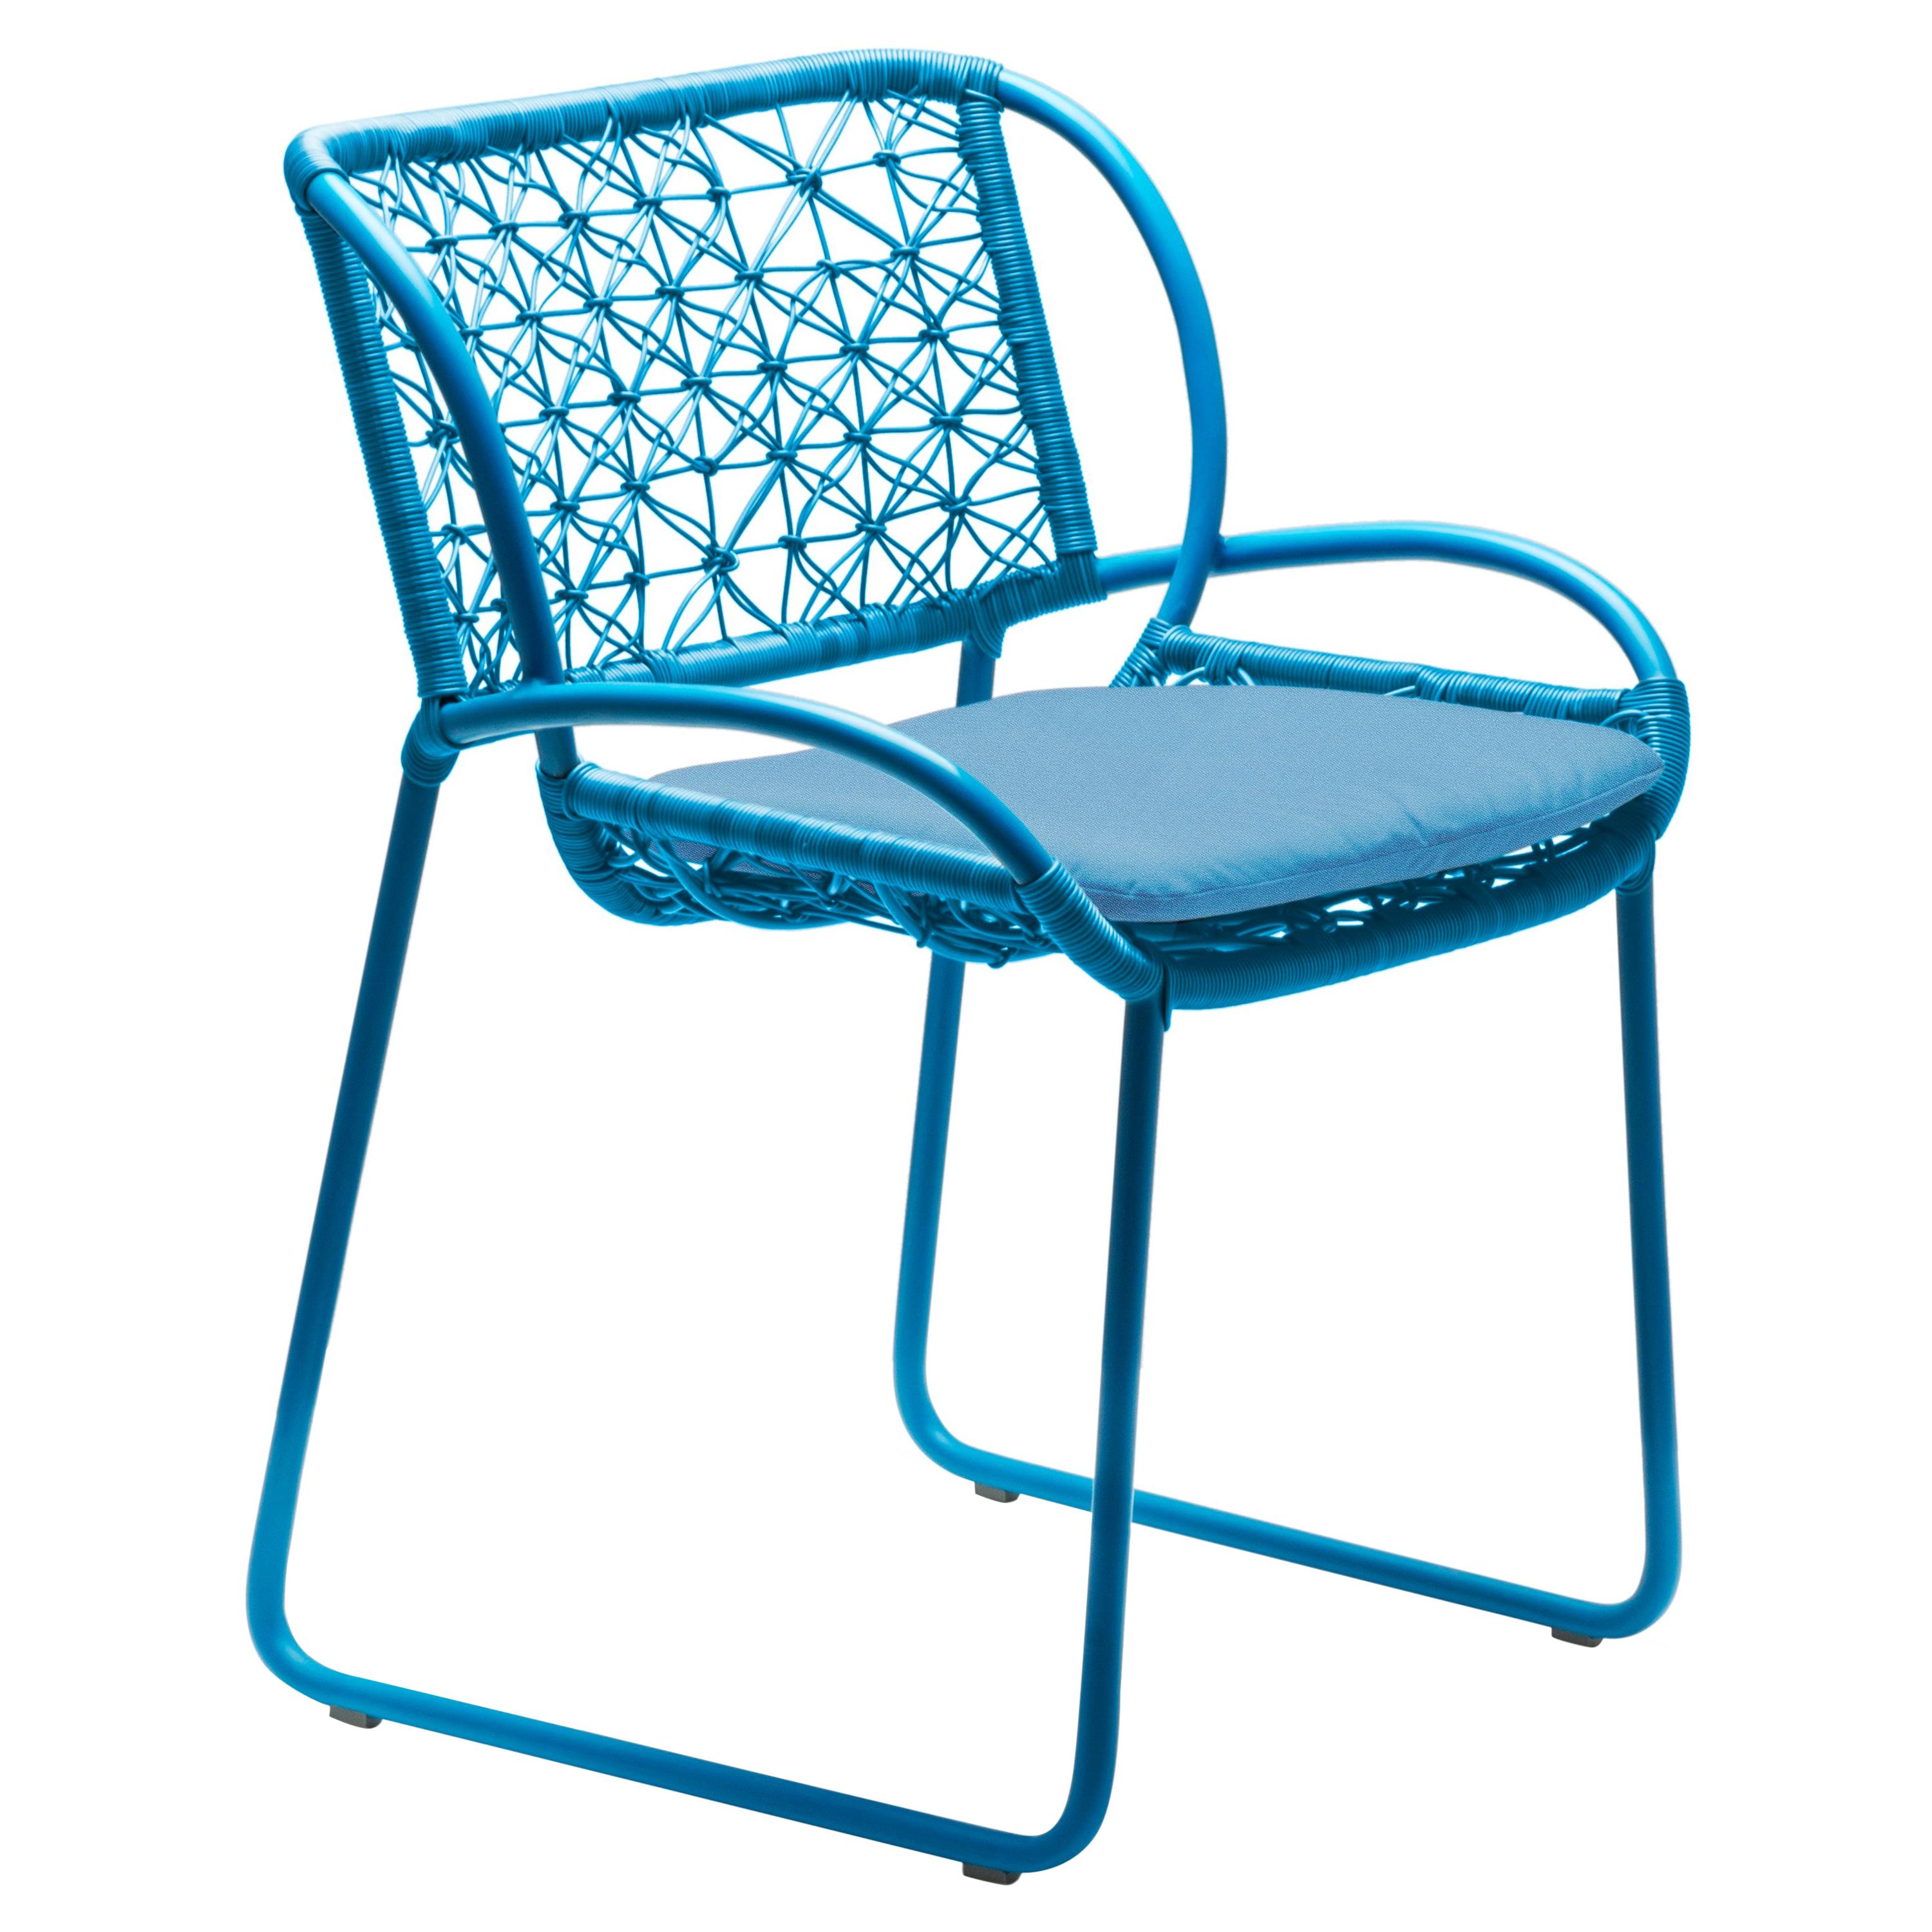 Adesso Sky Blue Armchair by Kenneth Cobonpue